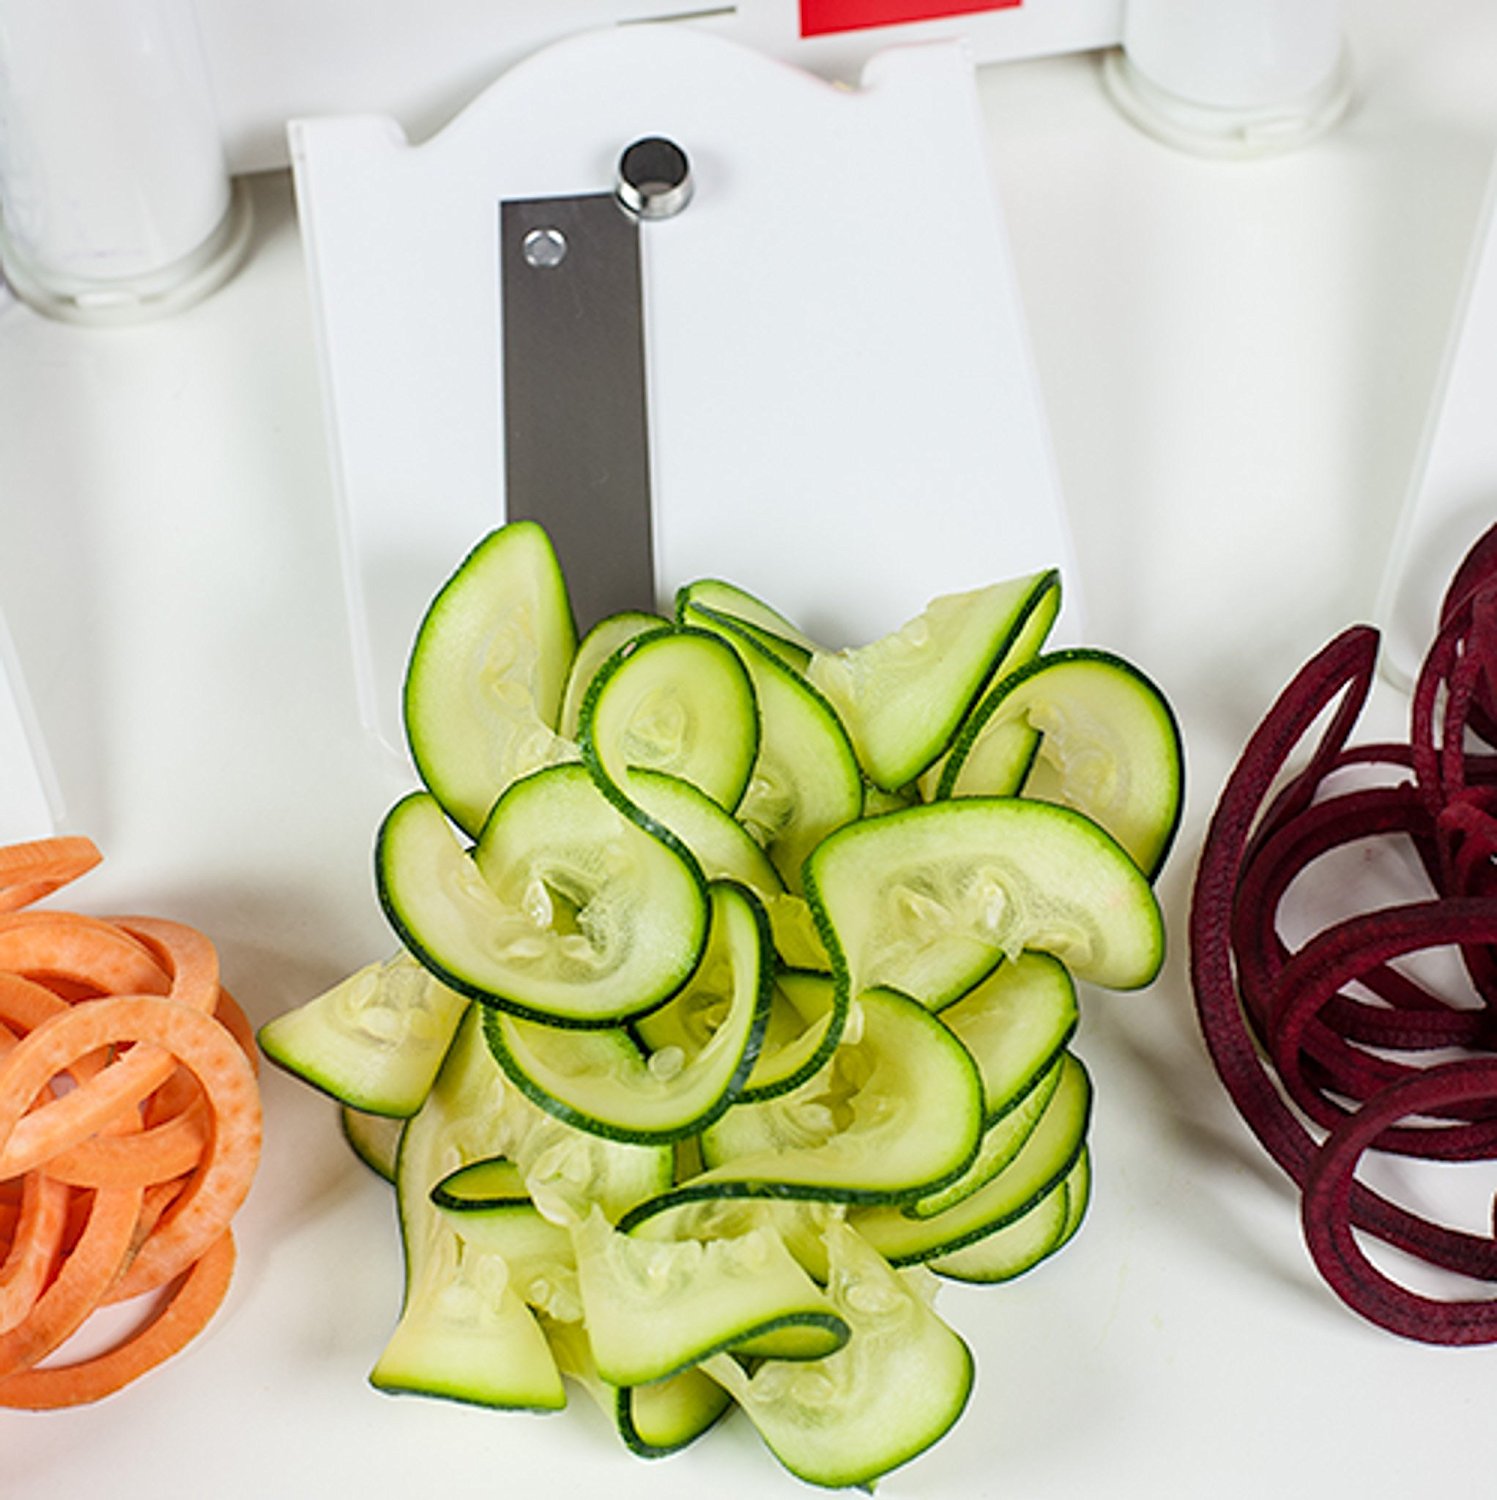 Paderno World Cuisine Spiral Vegetable Slicer / Countertop-Mounted Plastic Spiralizer Basic incl. 3 Different Blades Made of Stainless Steel